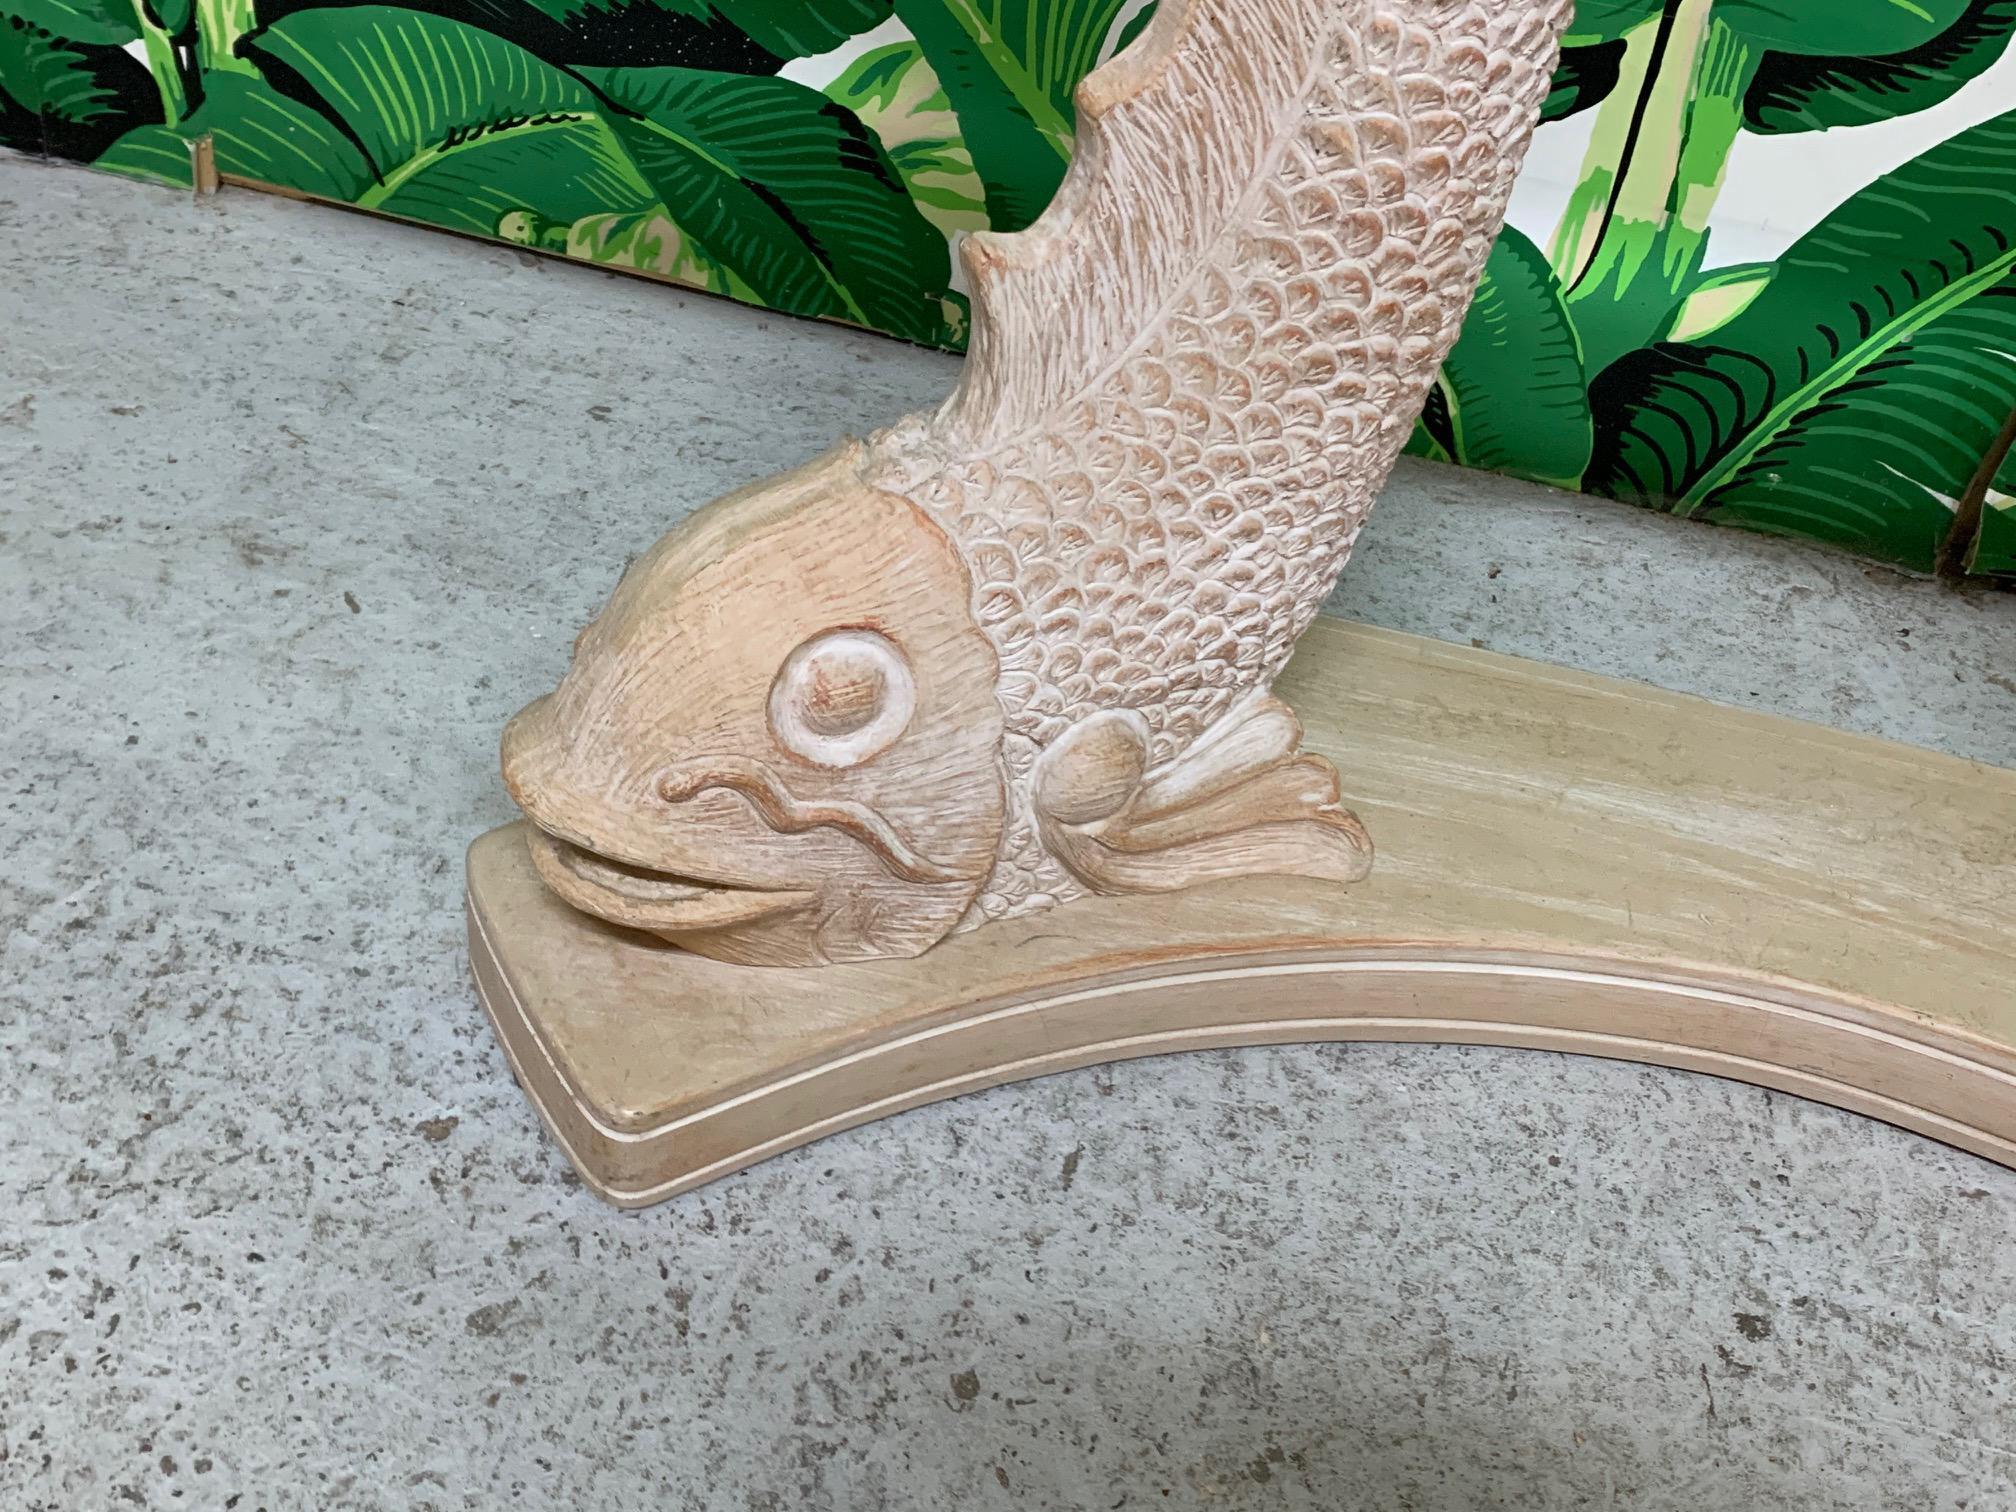 Japanese Koi Fish Sculptural Console Table In Good Condition For Sale In Jacksonville, FL